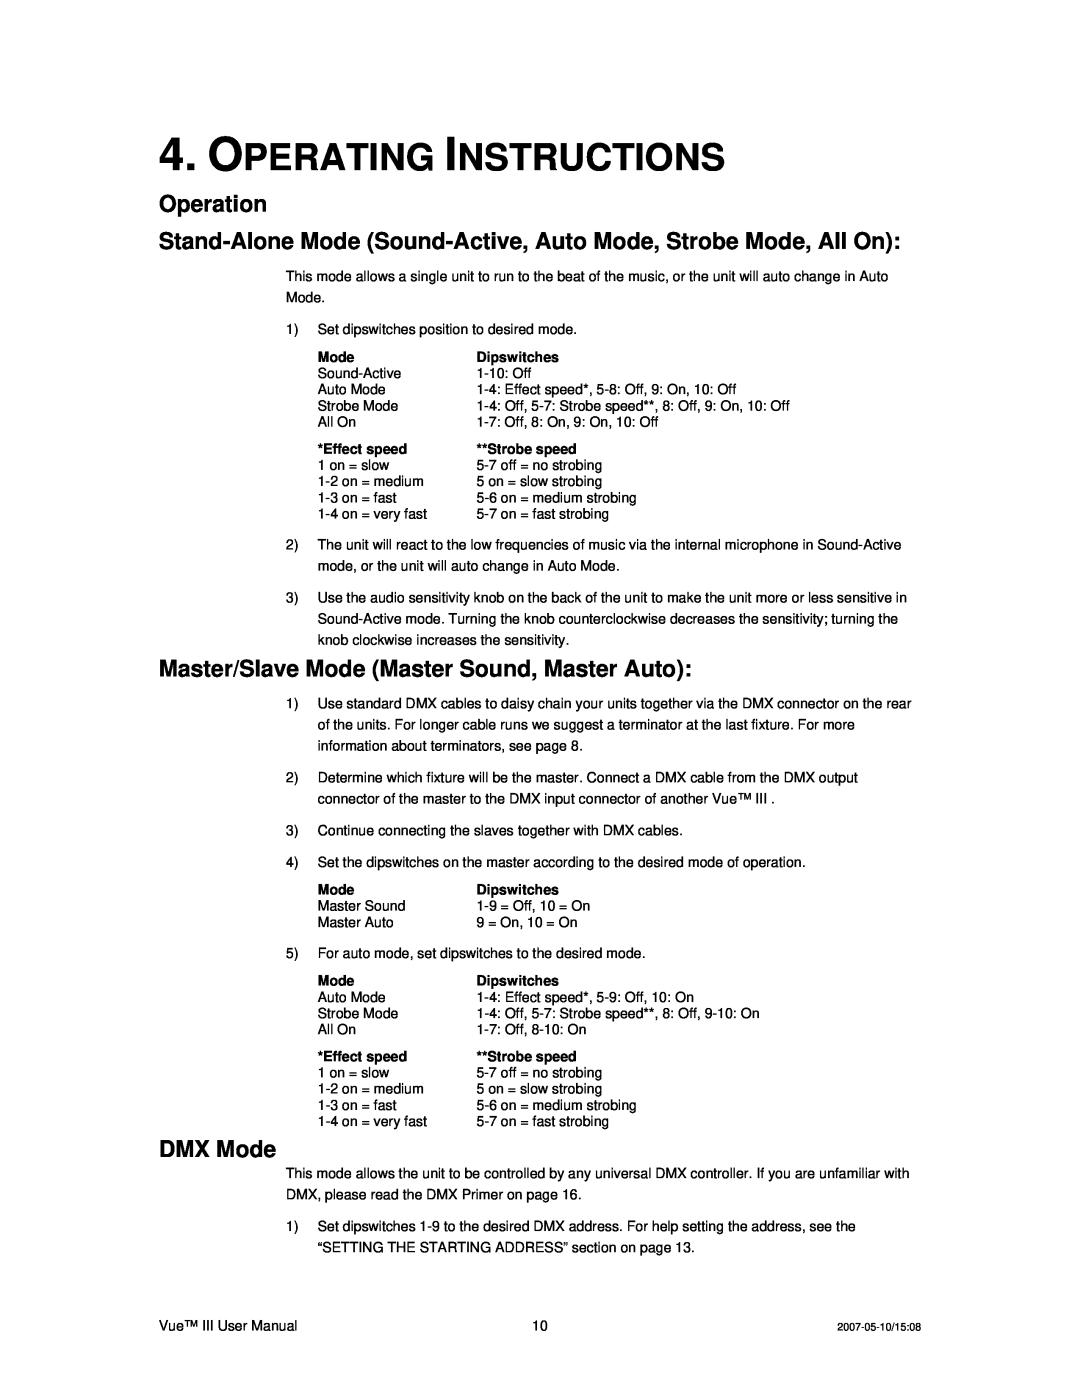 Chauvet Vue III Operating Instructions, Operation, Master/Slave Mode Master Sound, Master Auto, DMX Mode, Dipswitches 